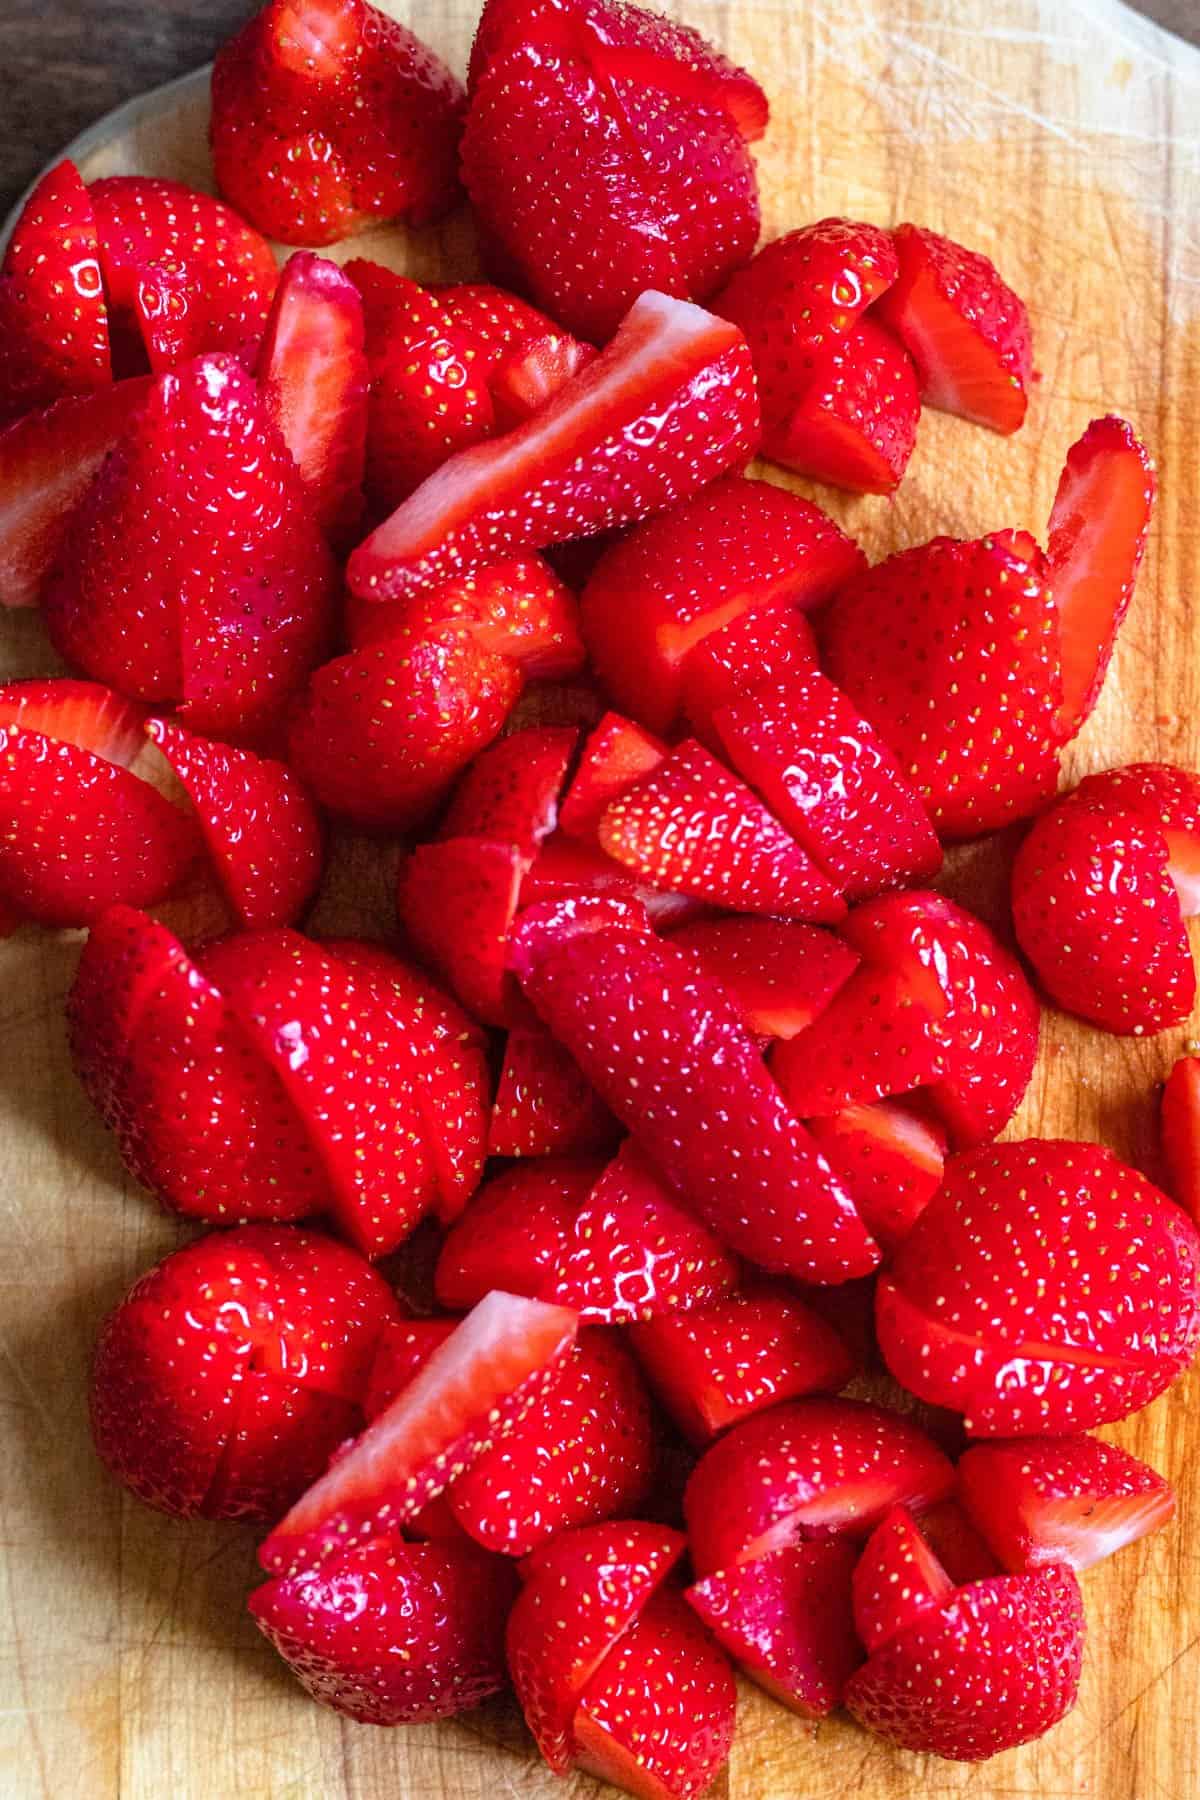 Clean strawberries cut up into pieces on a cutting board. 